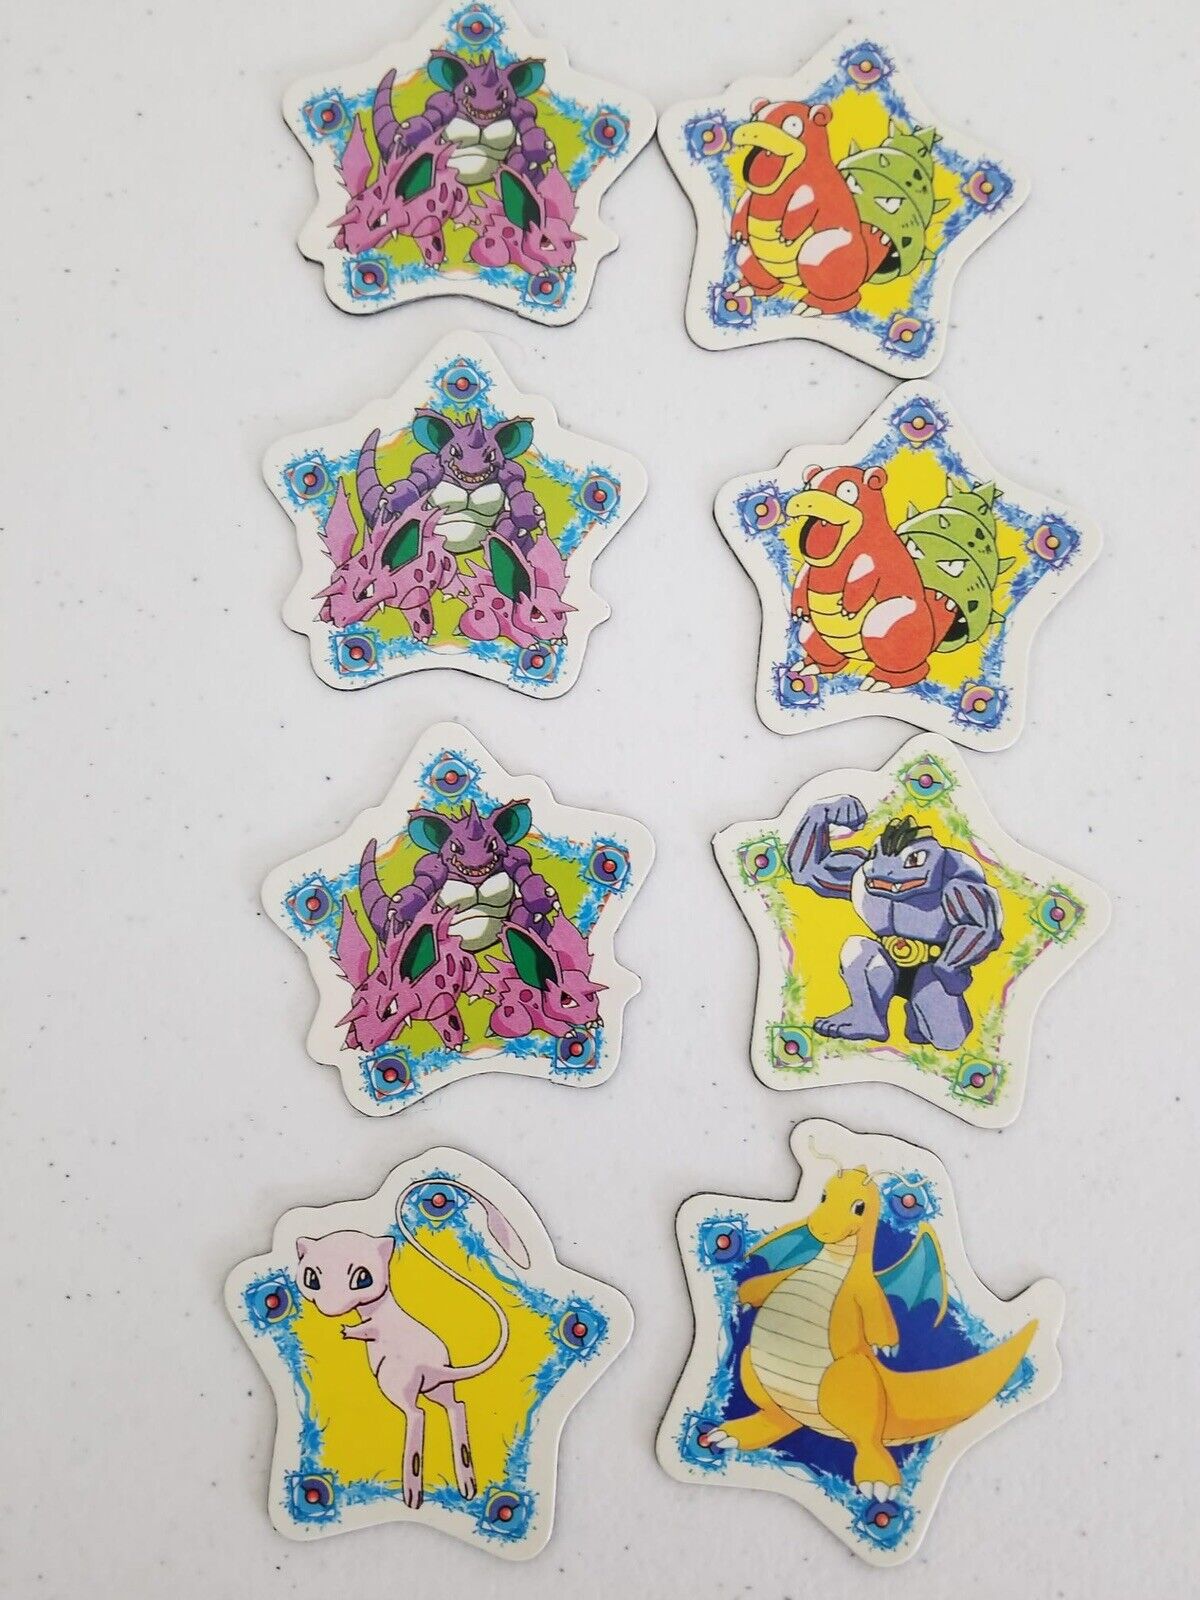 Rare Vintage 1990s Pokemon Magnets - First Generation Collectibles – Set of 24 Featuring Squirtle, Blastoise, and More – 2x2" - TreasuTiques